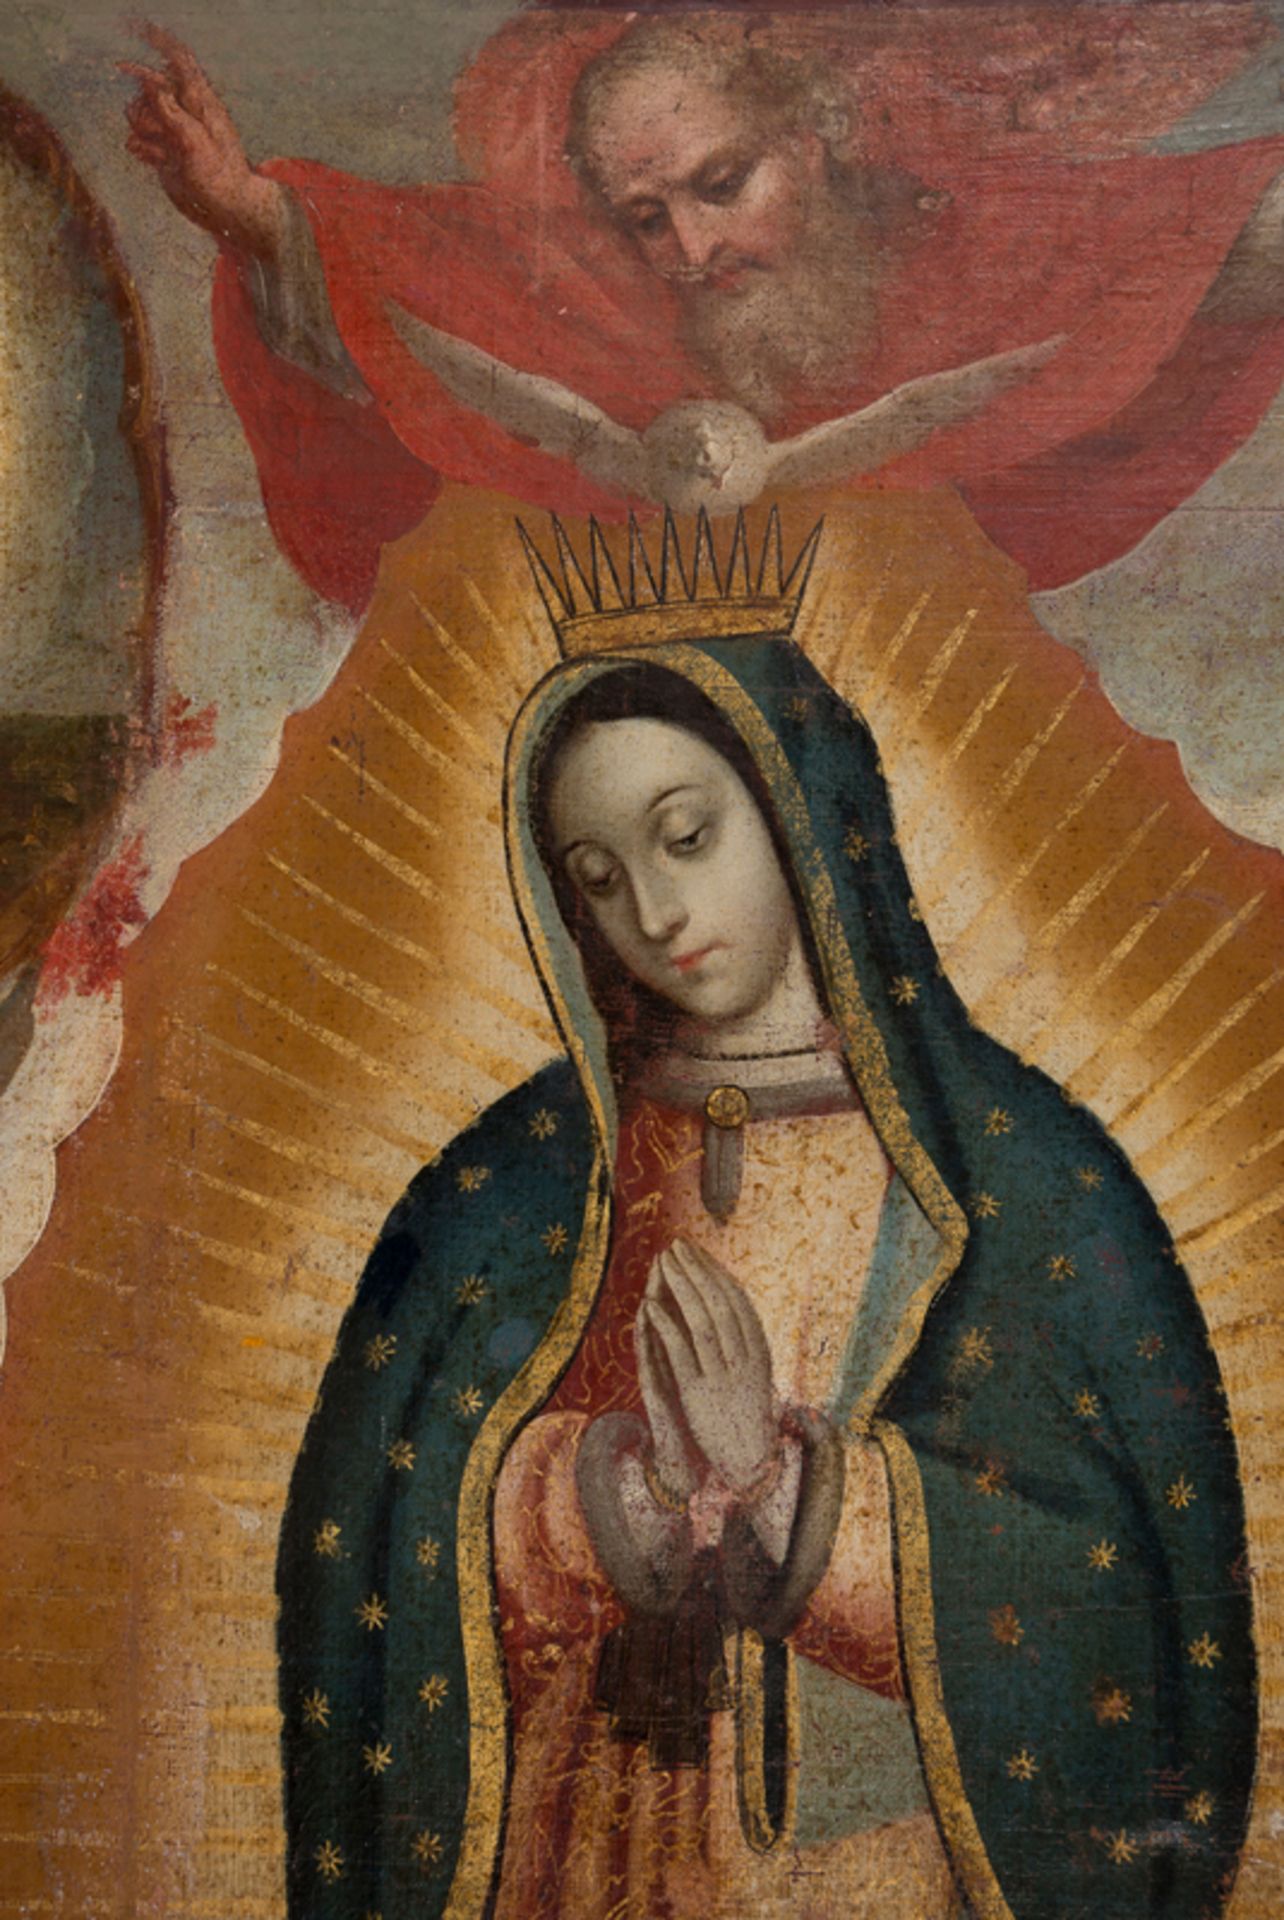 Colonial School. New Spain. 17th centuryColonial School. New Spain. 17th century "Our Lady of - Image 2 of 8